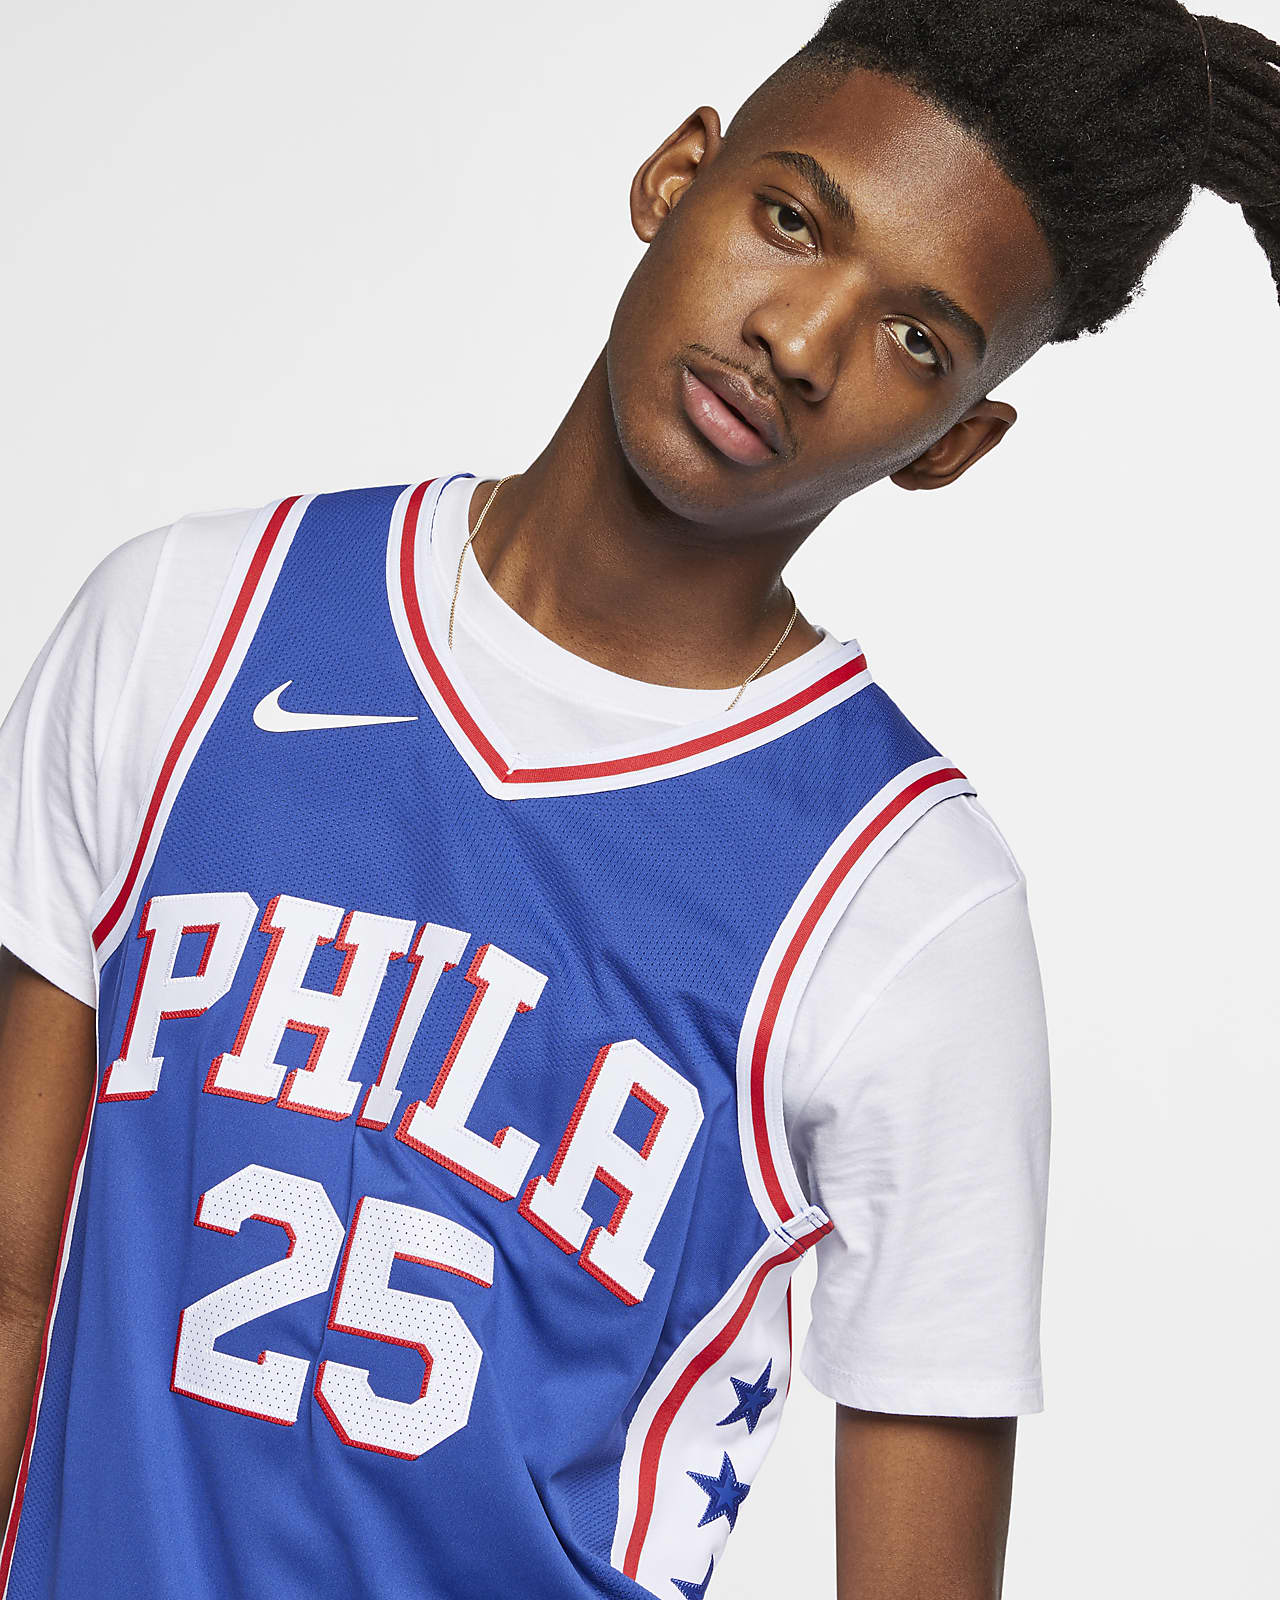 sixers icon jersey